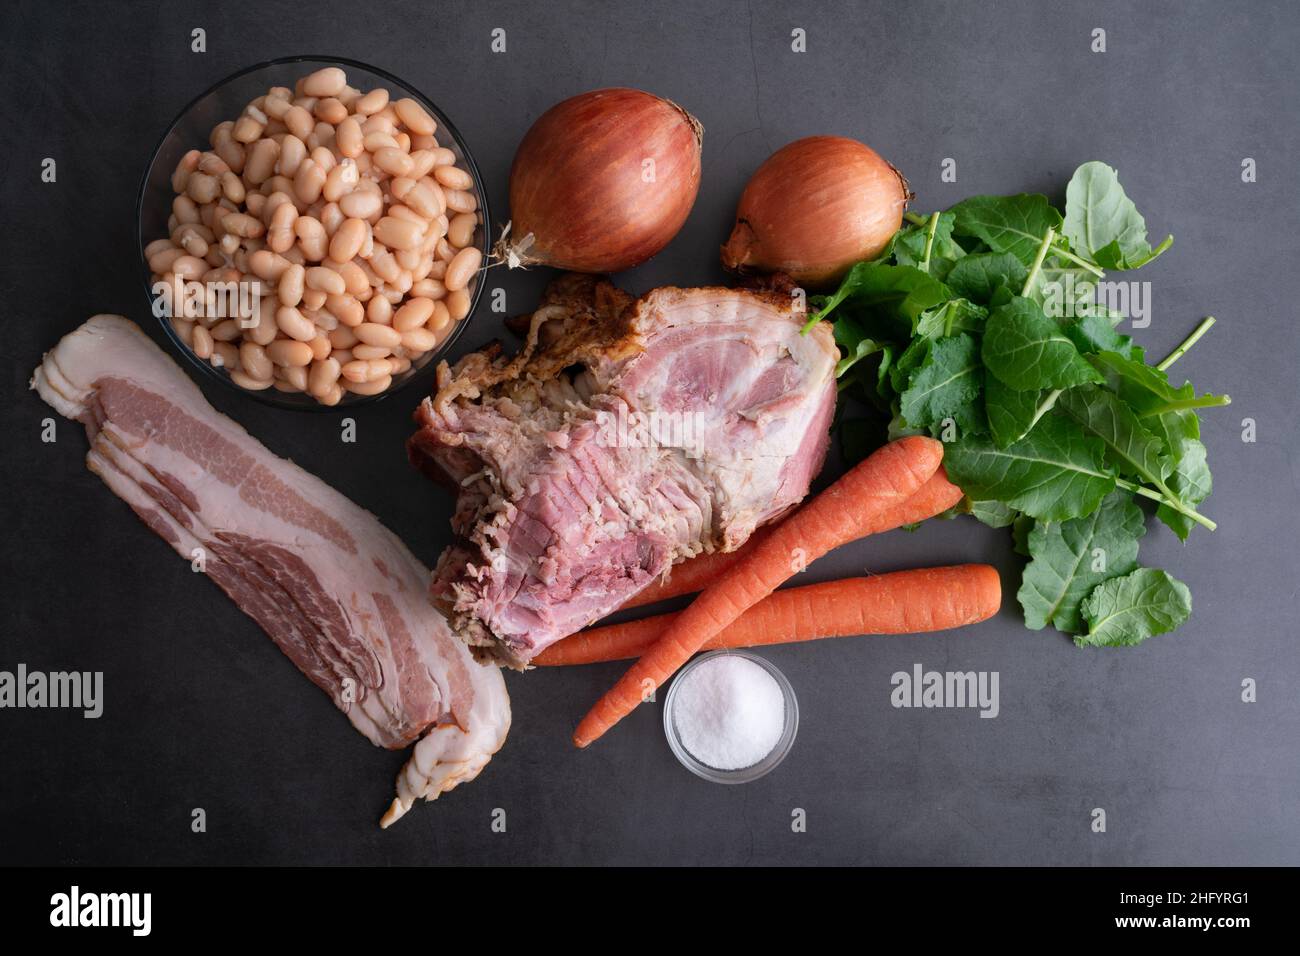 Ham Bone Soup with White Beans and Kale  Ingredients: Overhead view of hambone, bacon, and vegetables on a dark background Stock Photo